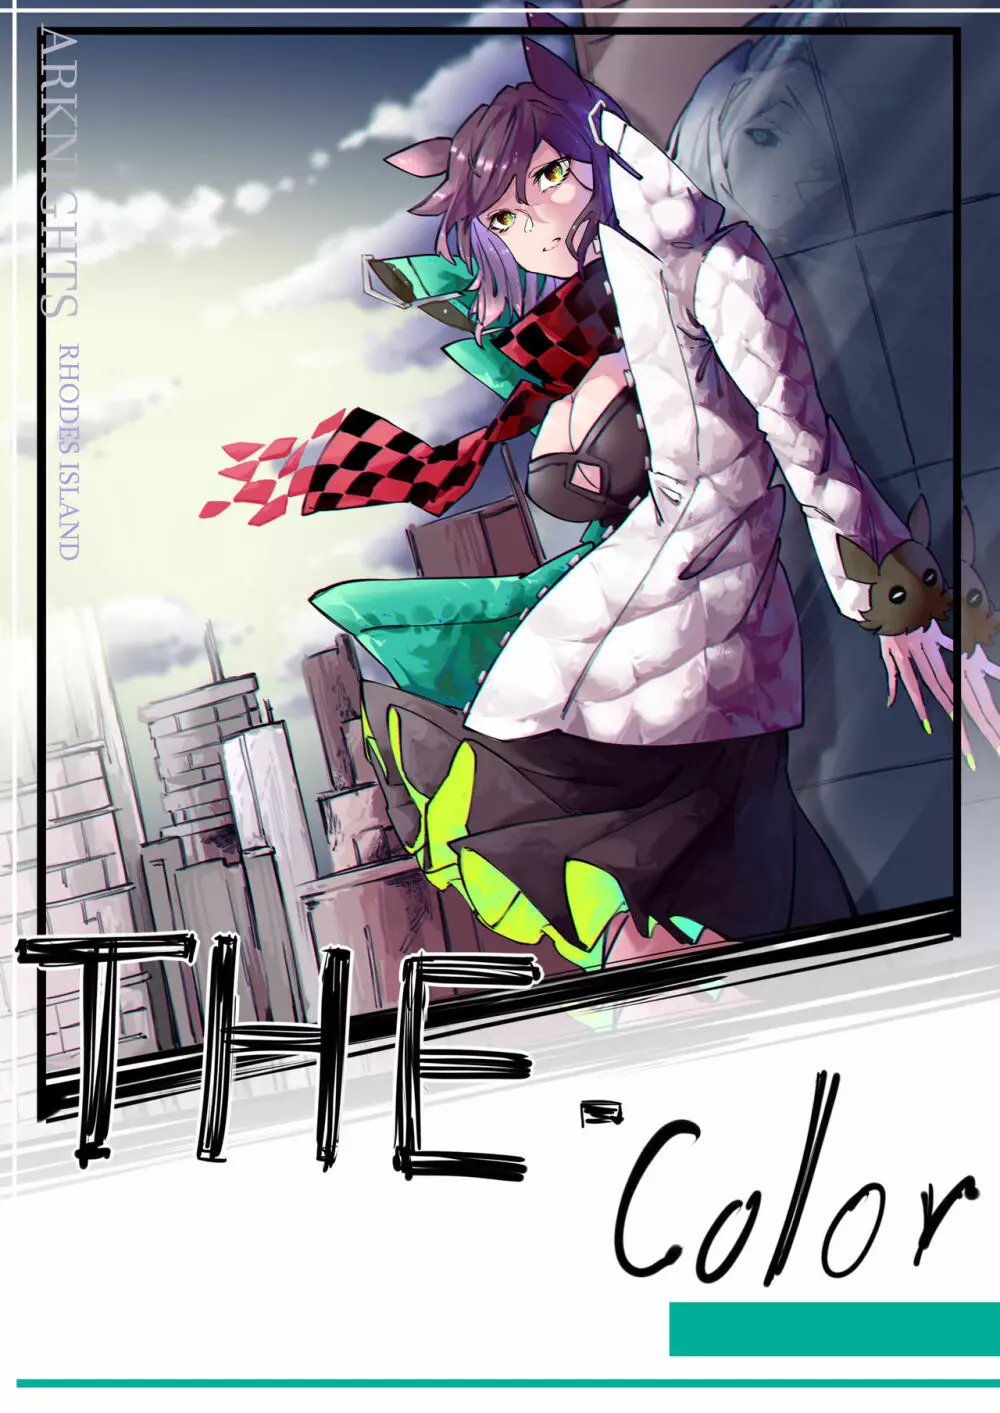 THE coloer